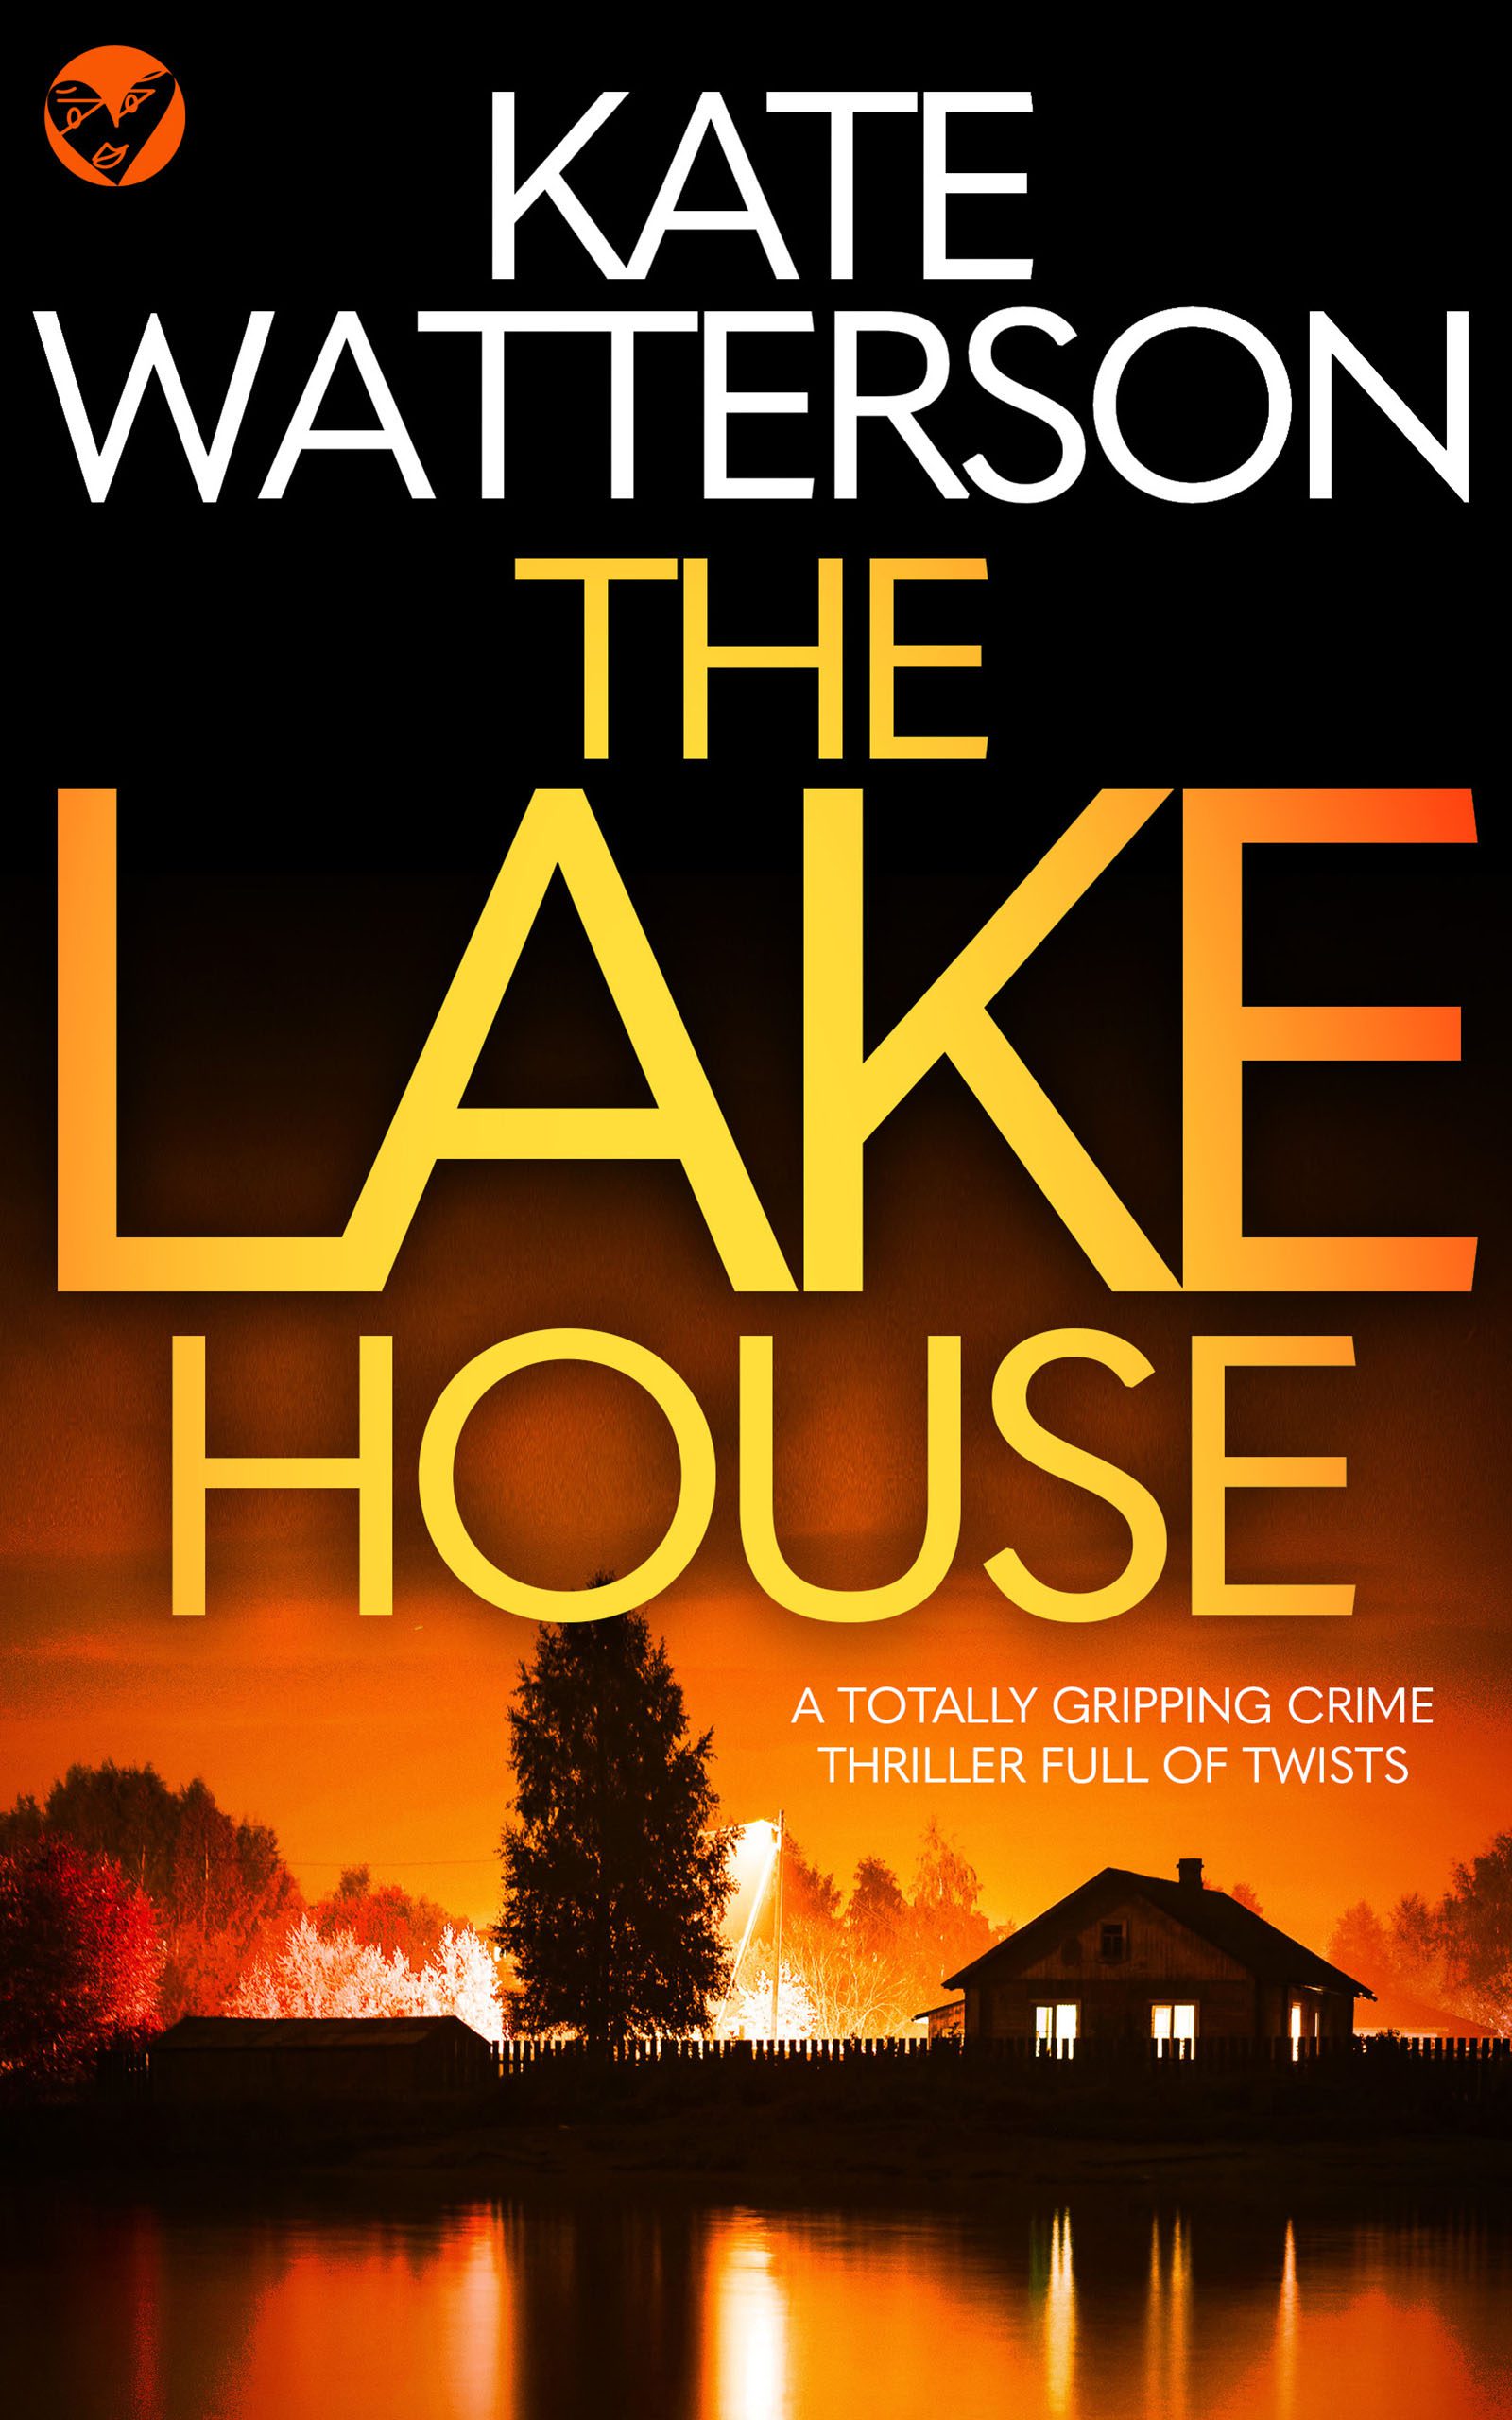 The Lake House book cover